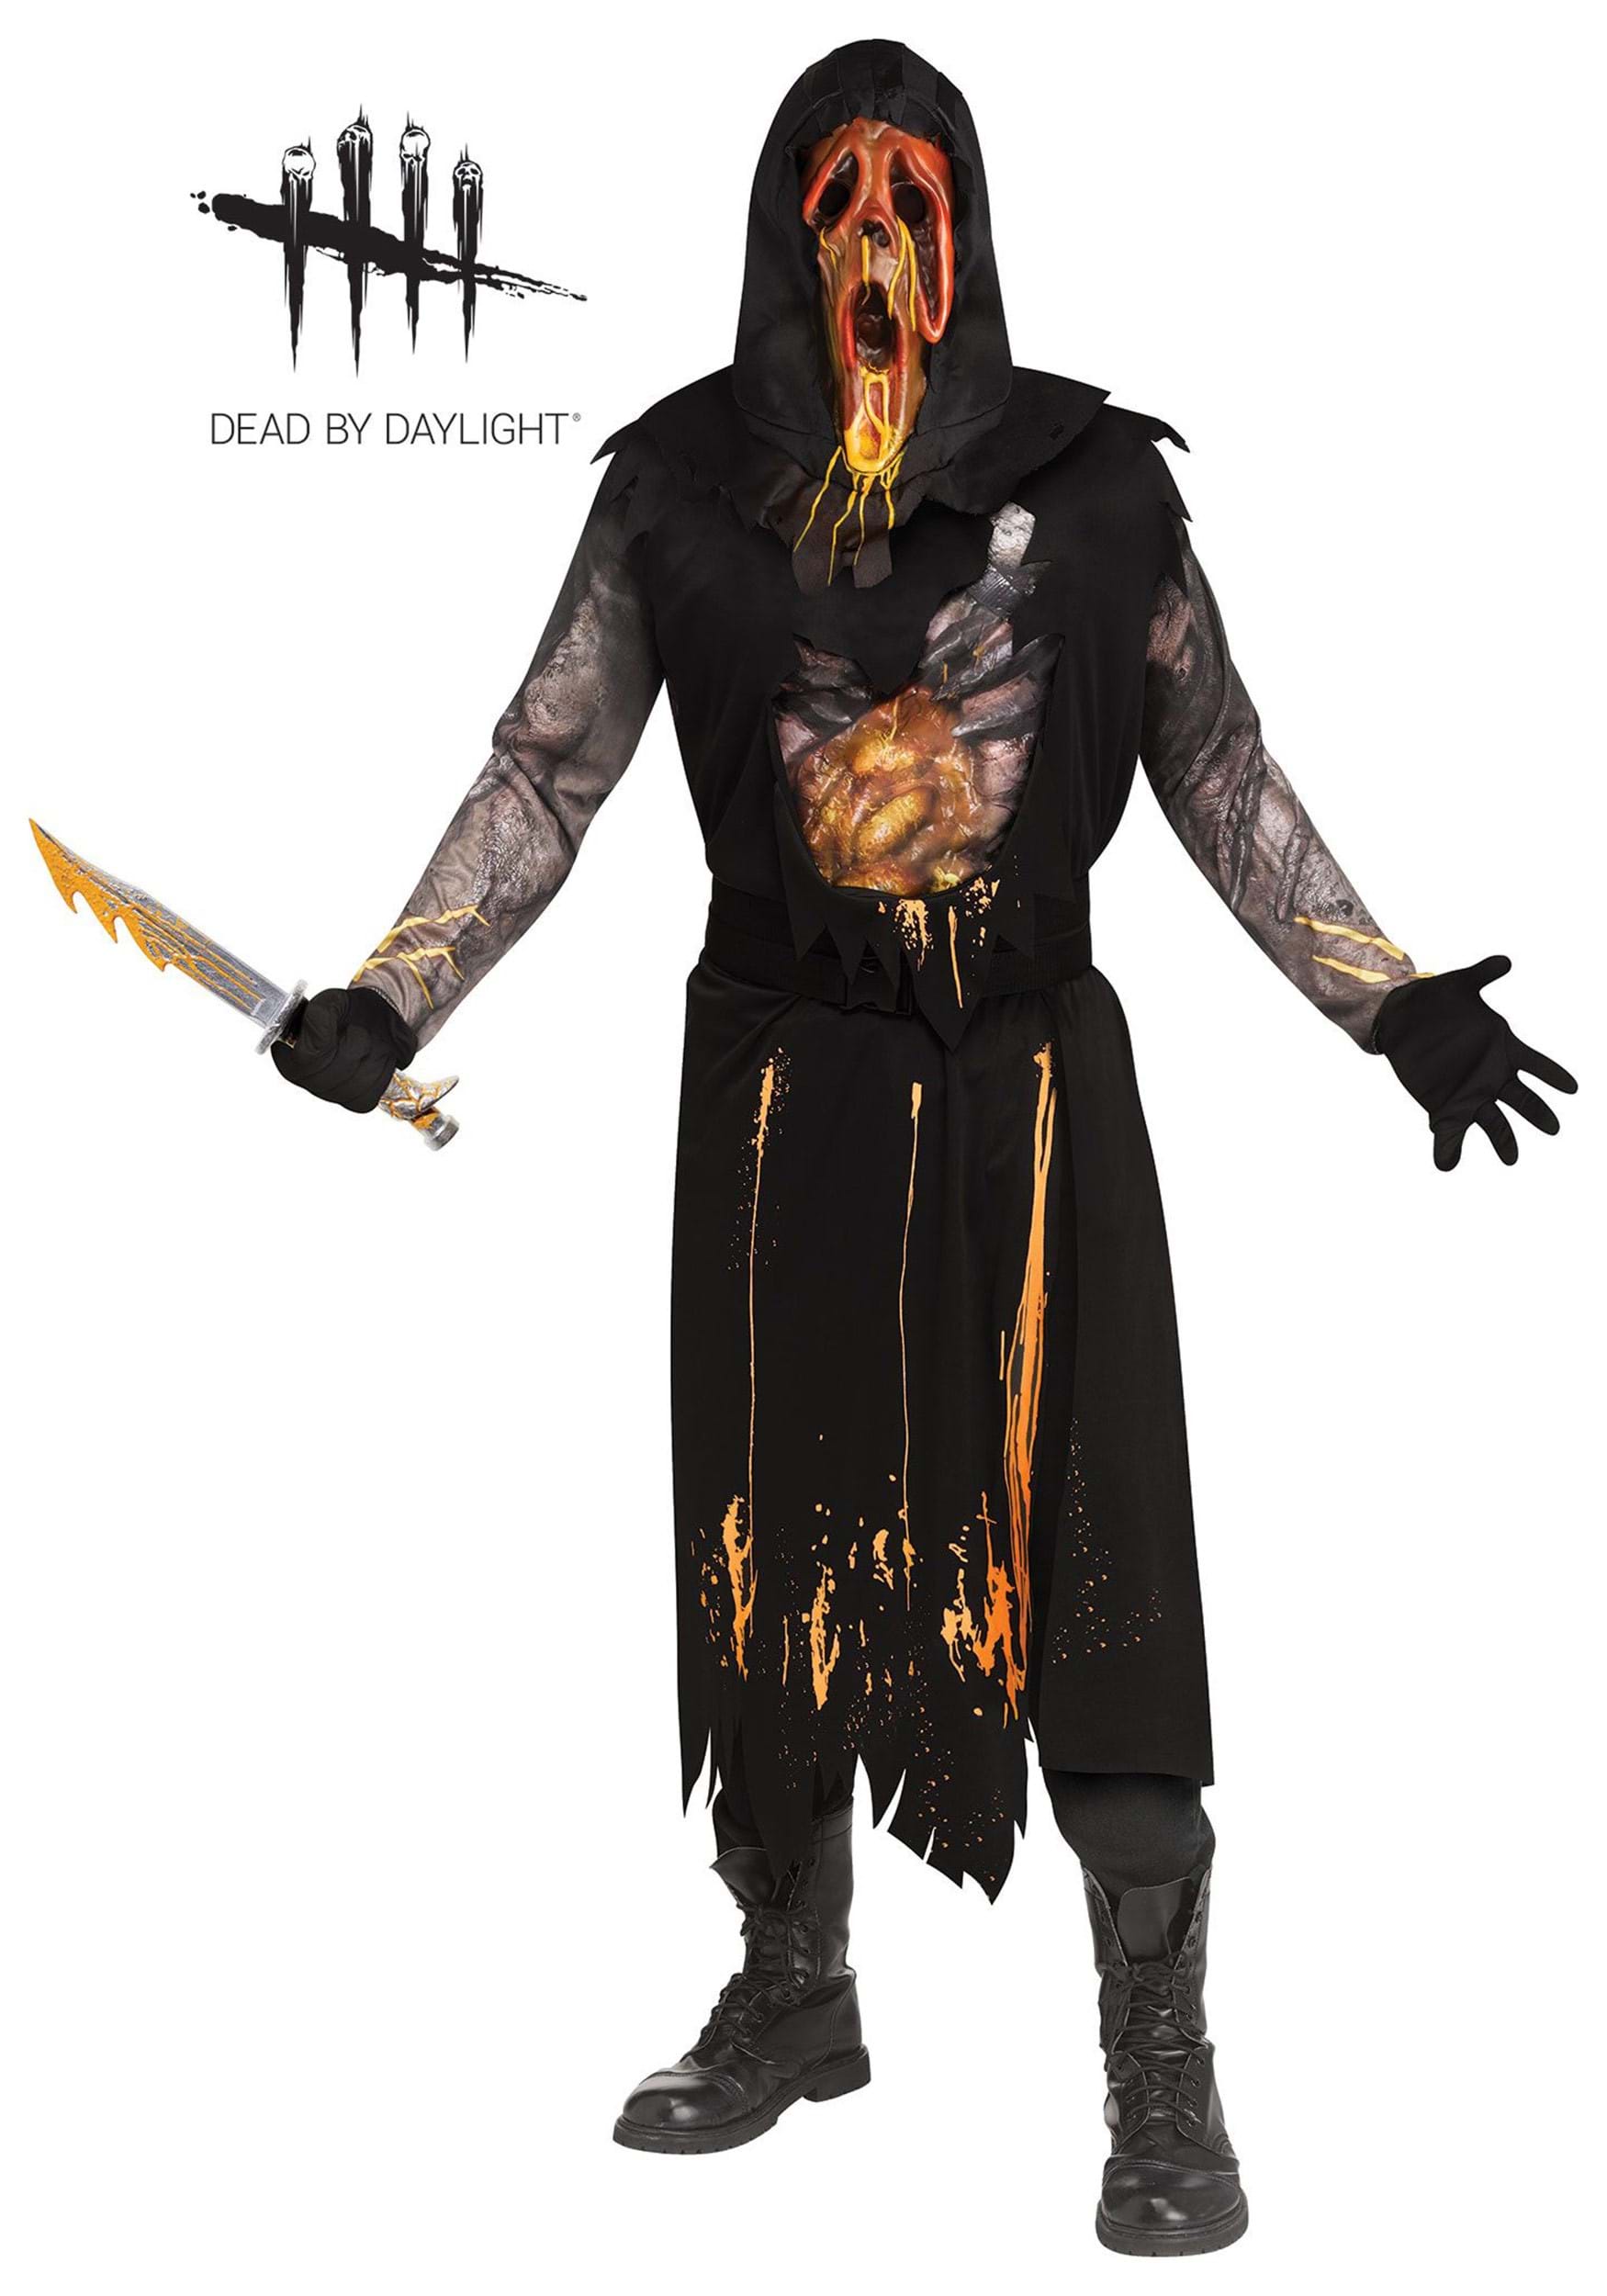 Dead by daylight costumes